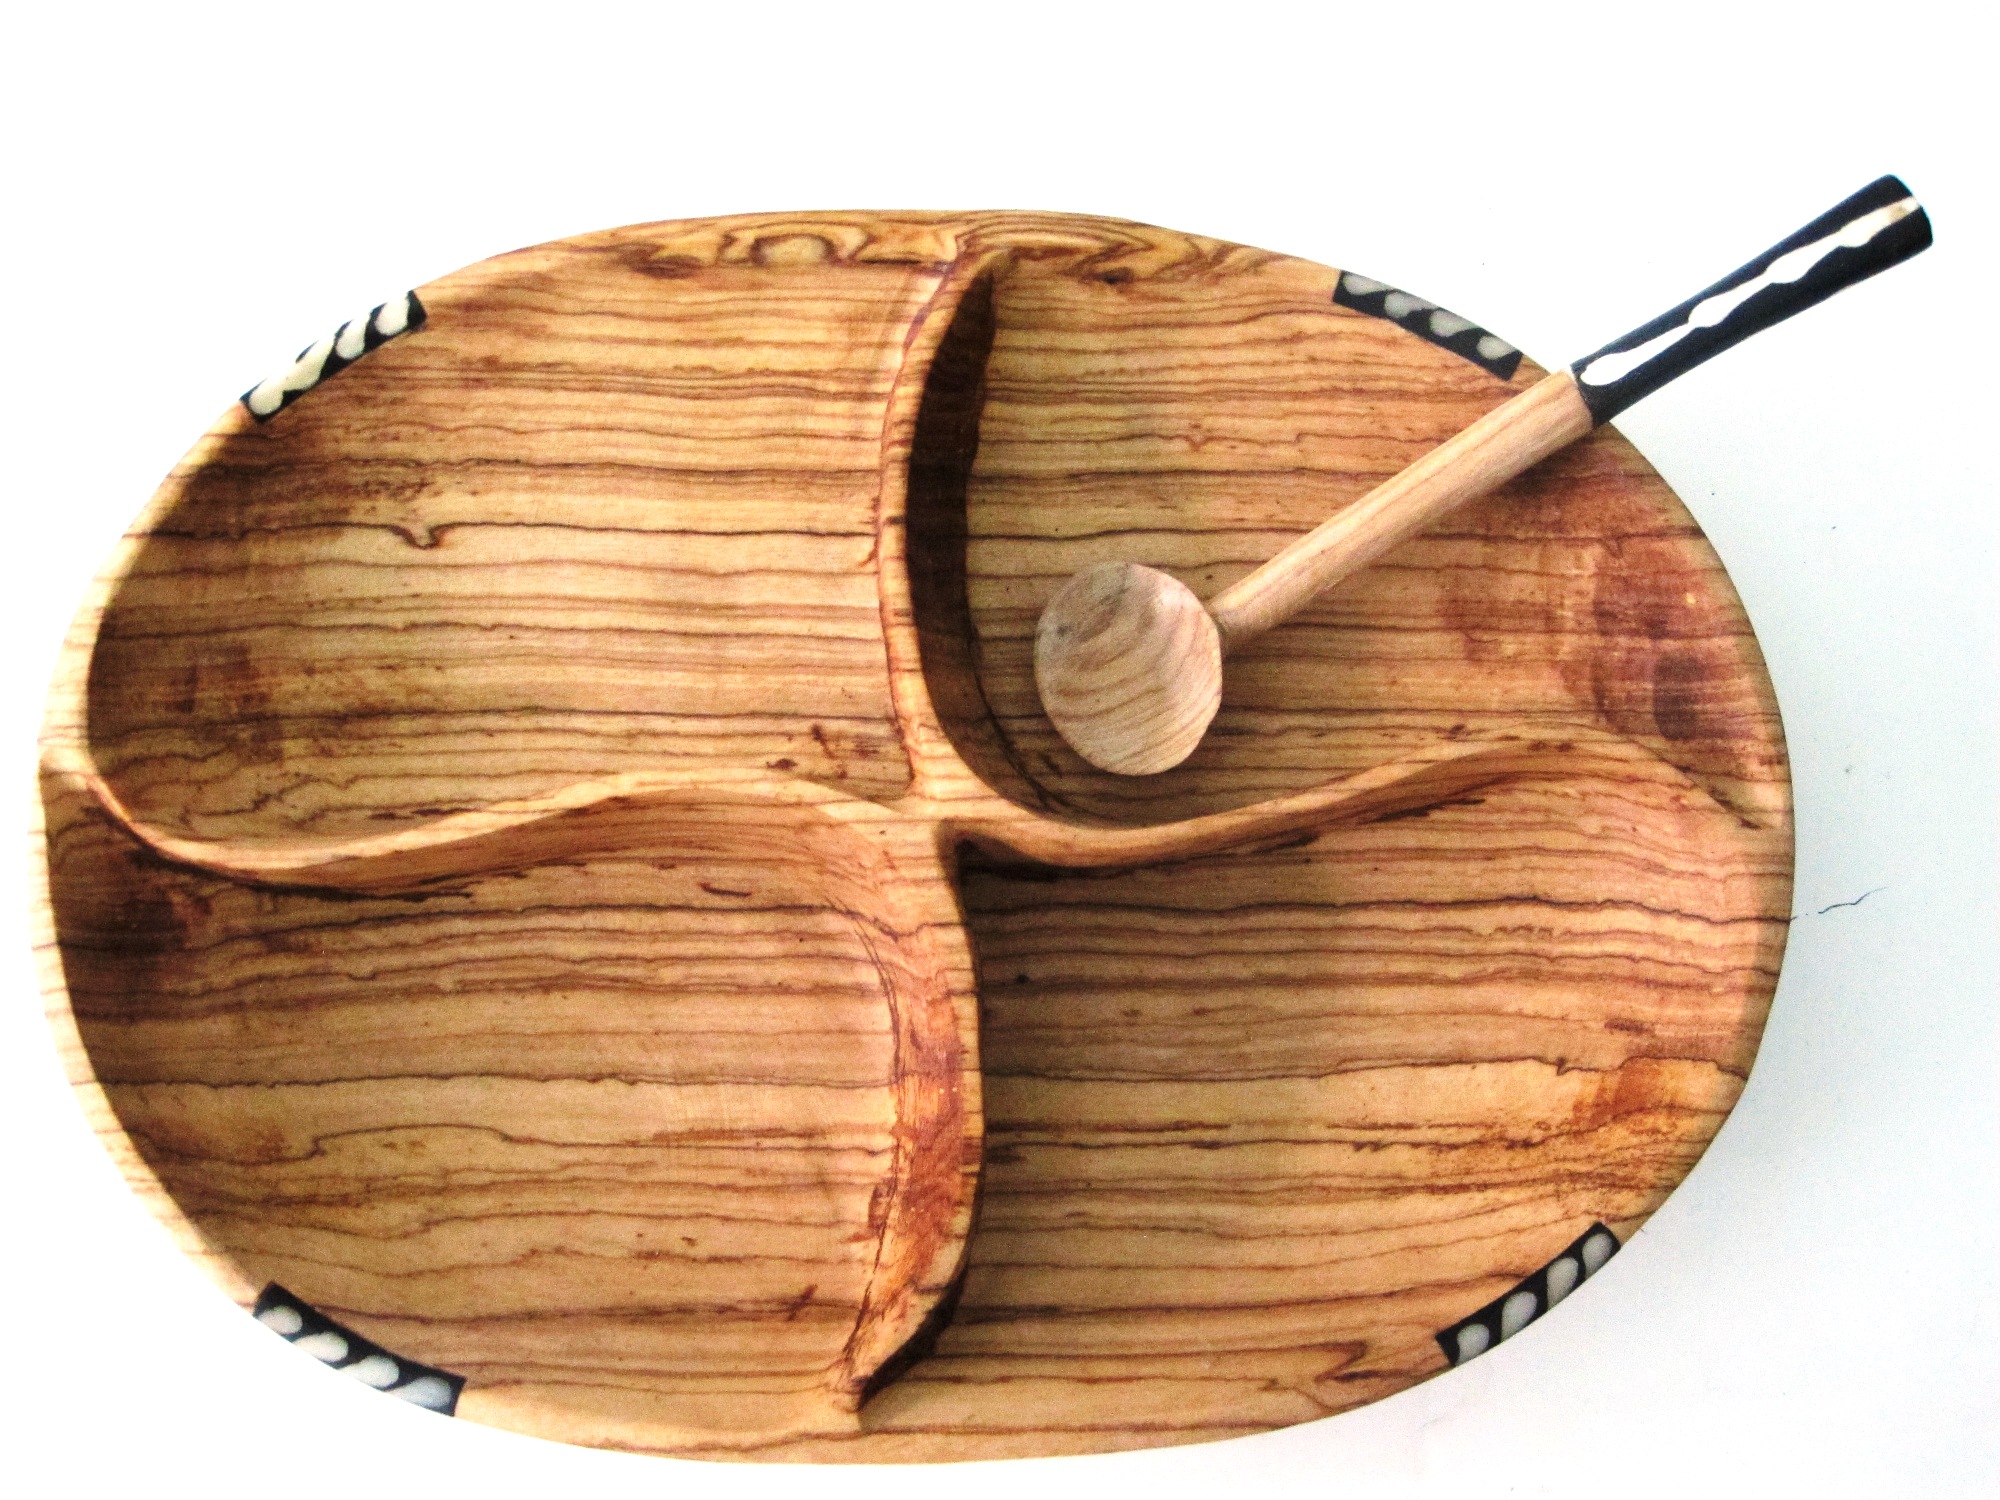 4 section Bone/Wood Bowl from Kenya with matching spoon